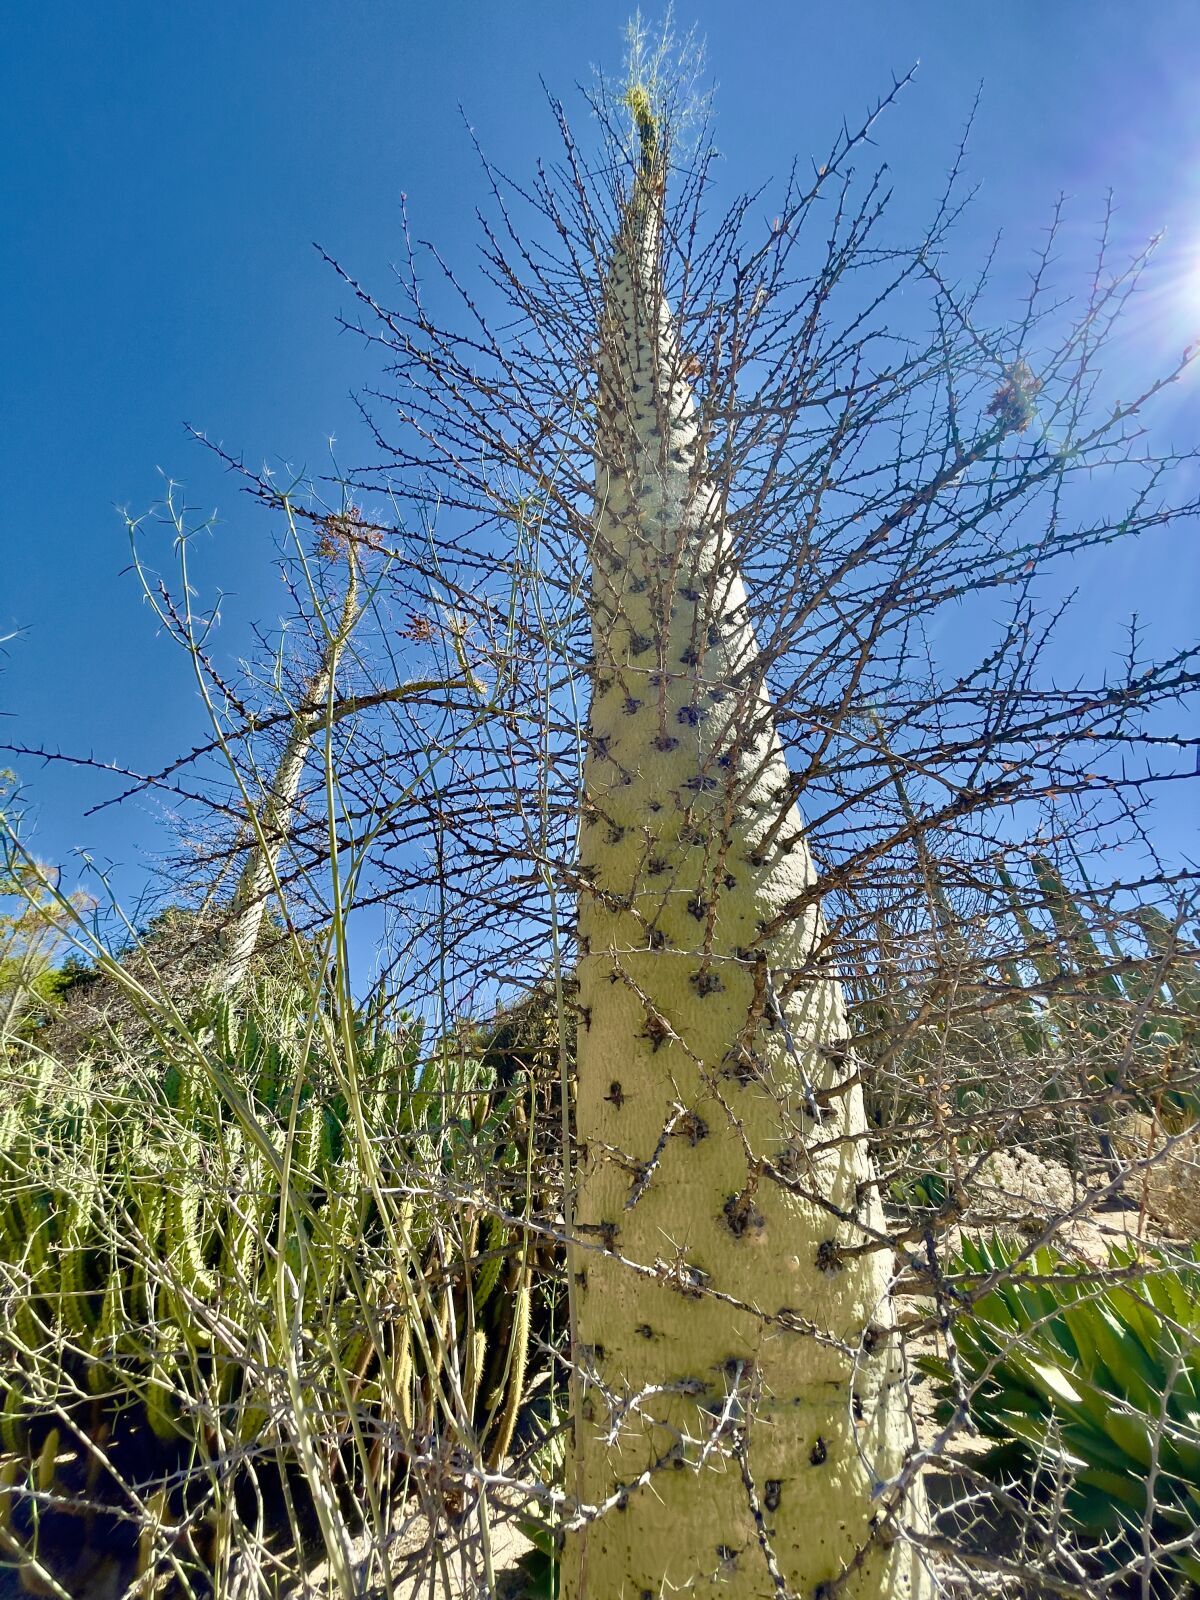 A Boojum tree stands in the Ocotillo desert. The plants have evolved to live in extreme heat and drought.